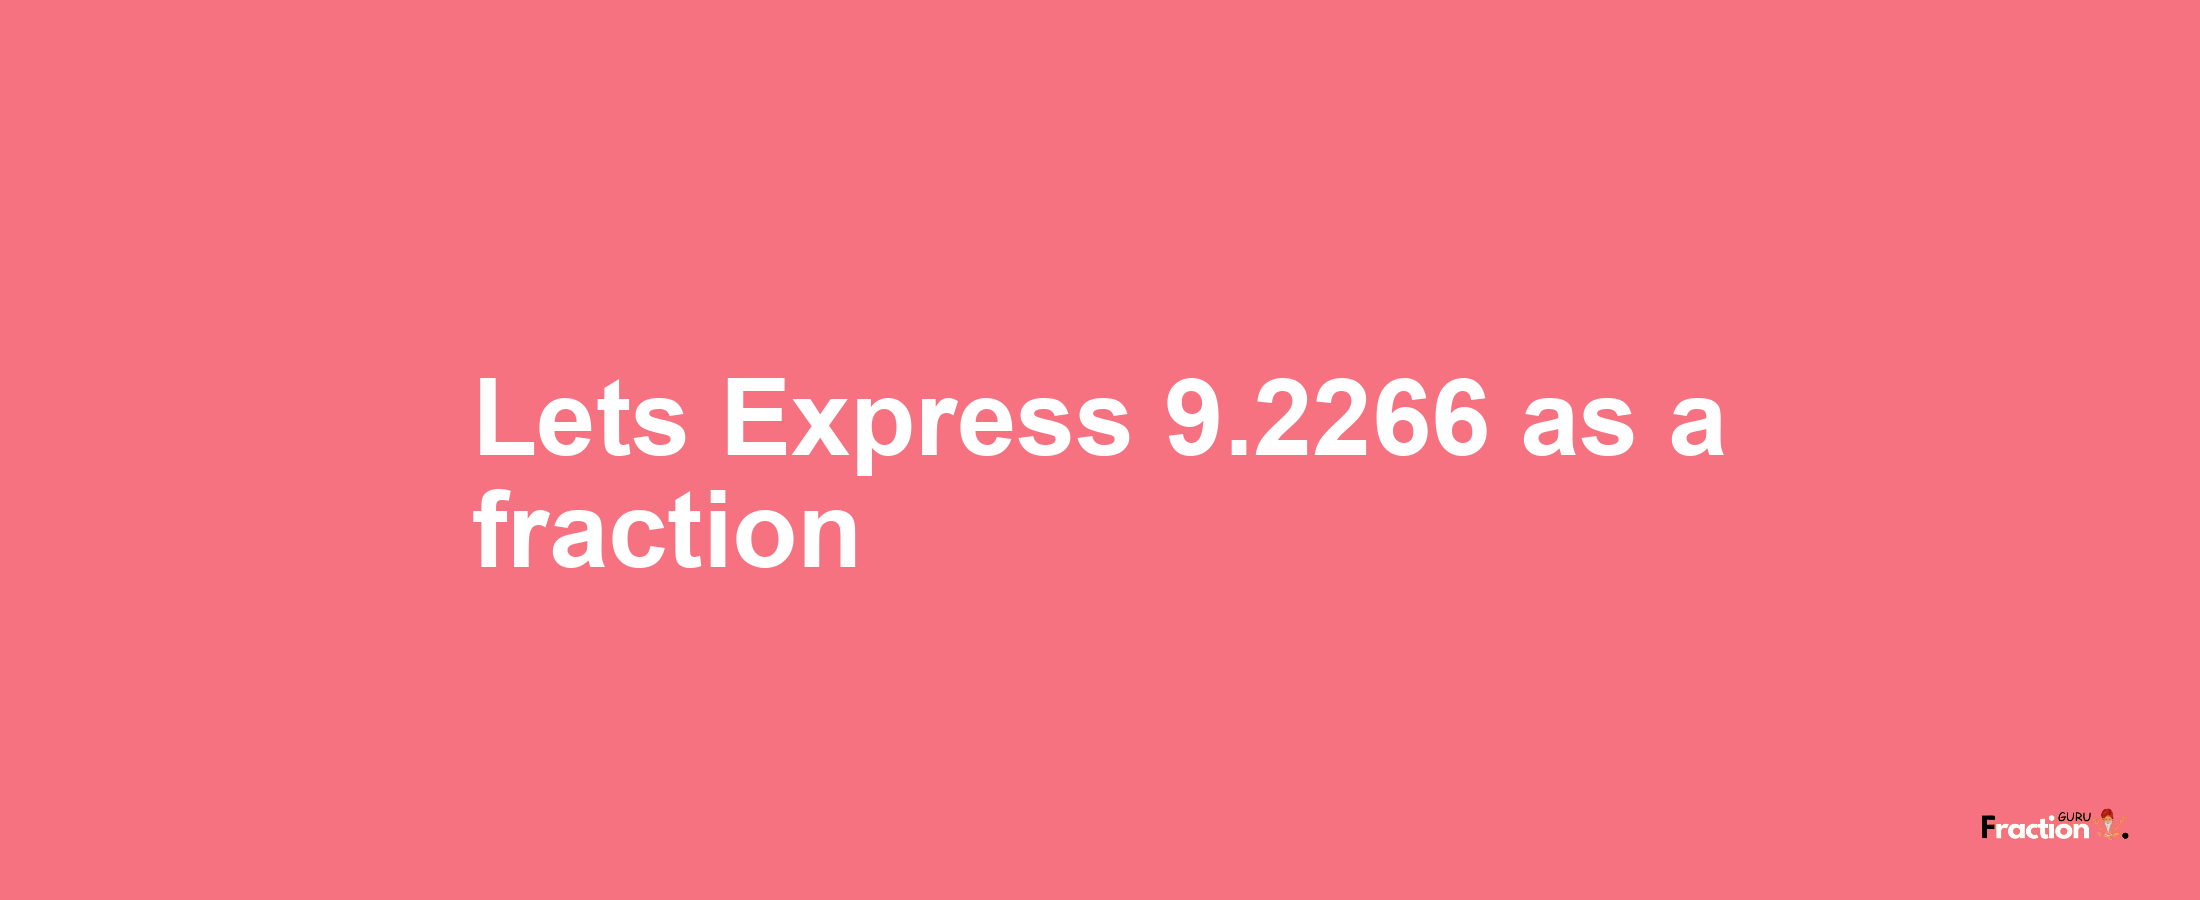 Lets Express 9.2266 as afraction